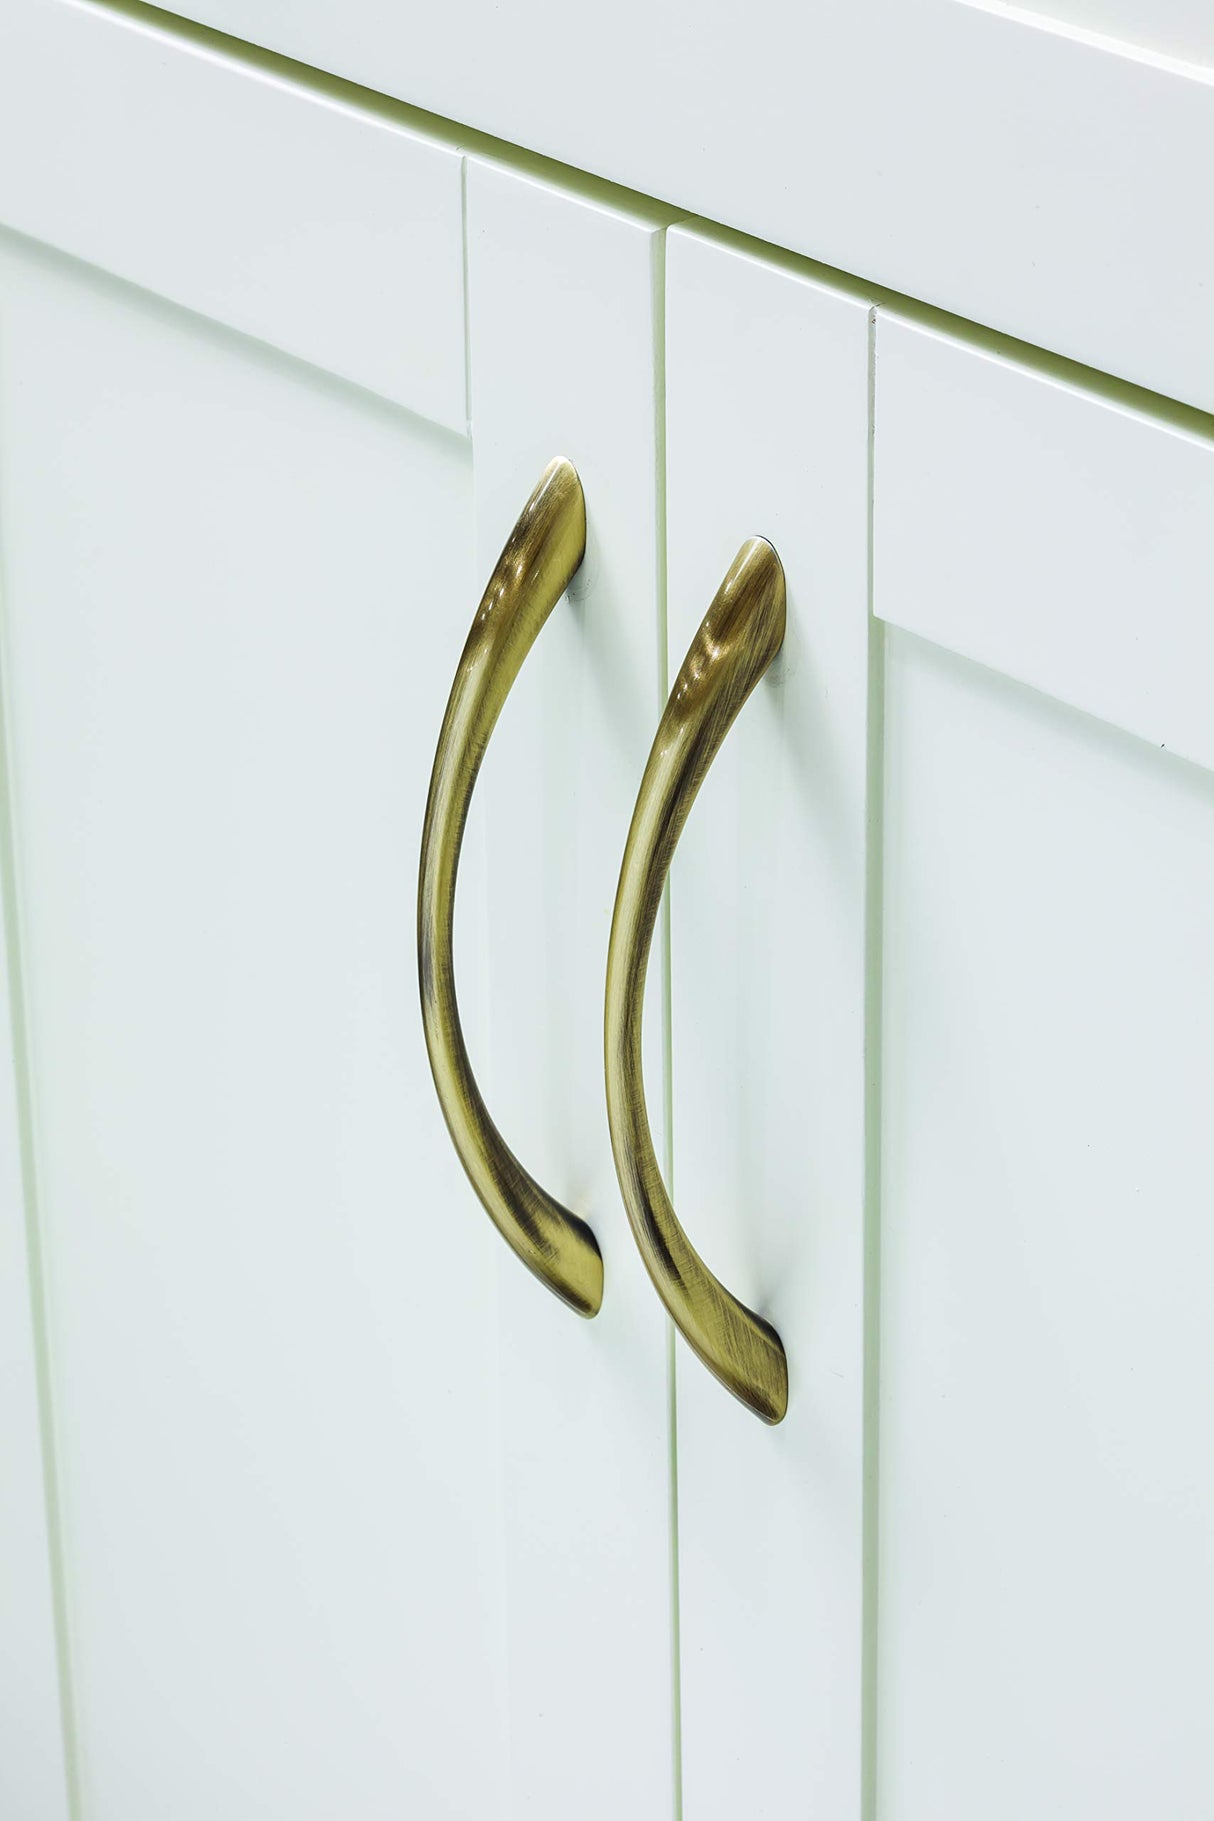 Elements 4655AB 128 mm Center-to-Center Brushed Antique Brass Arched Kingsport Cabinet Pull